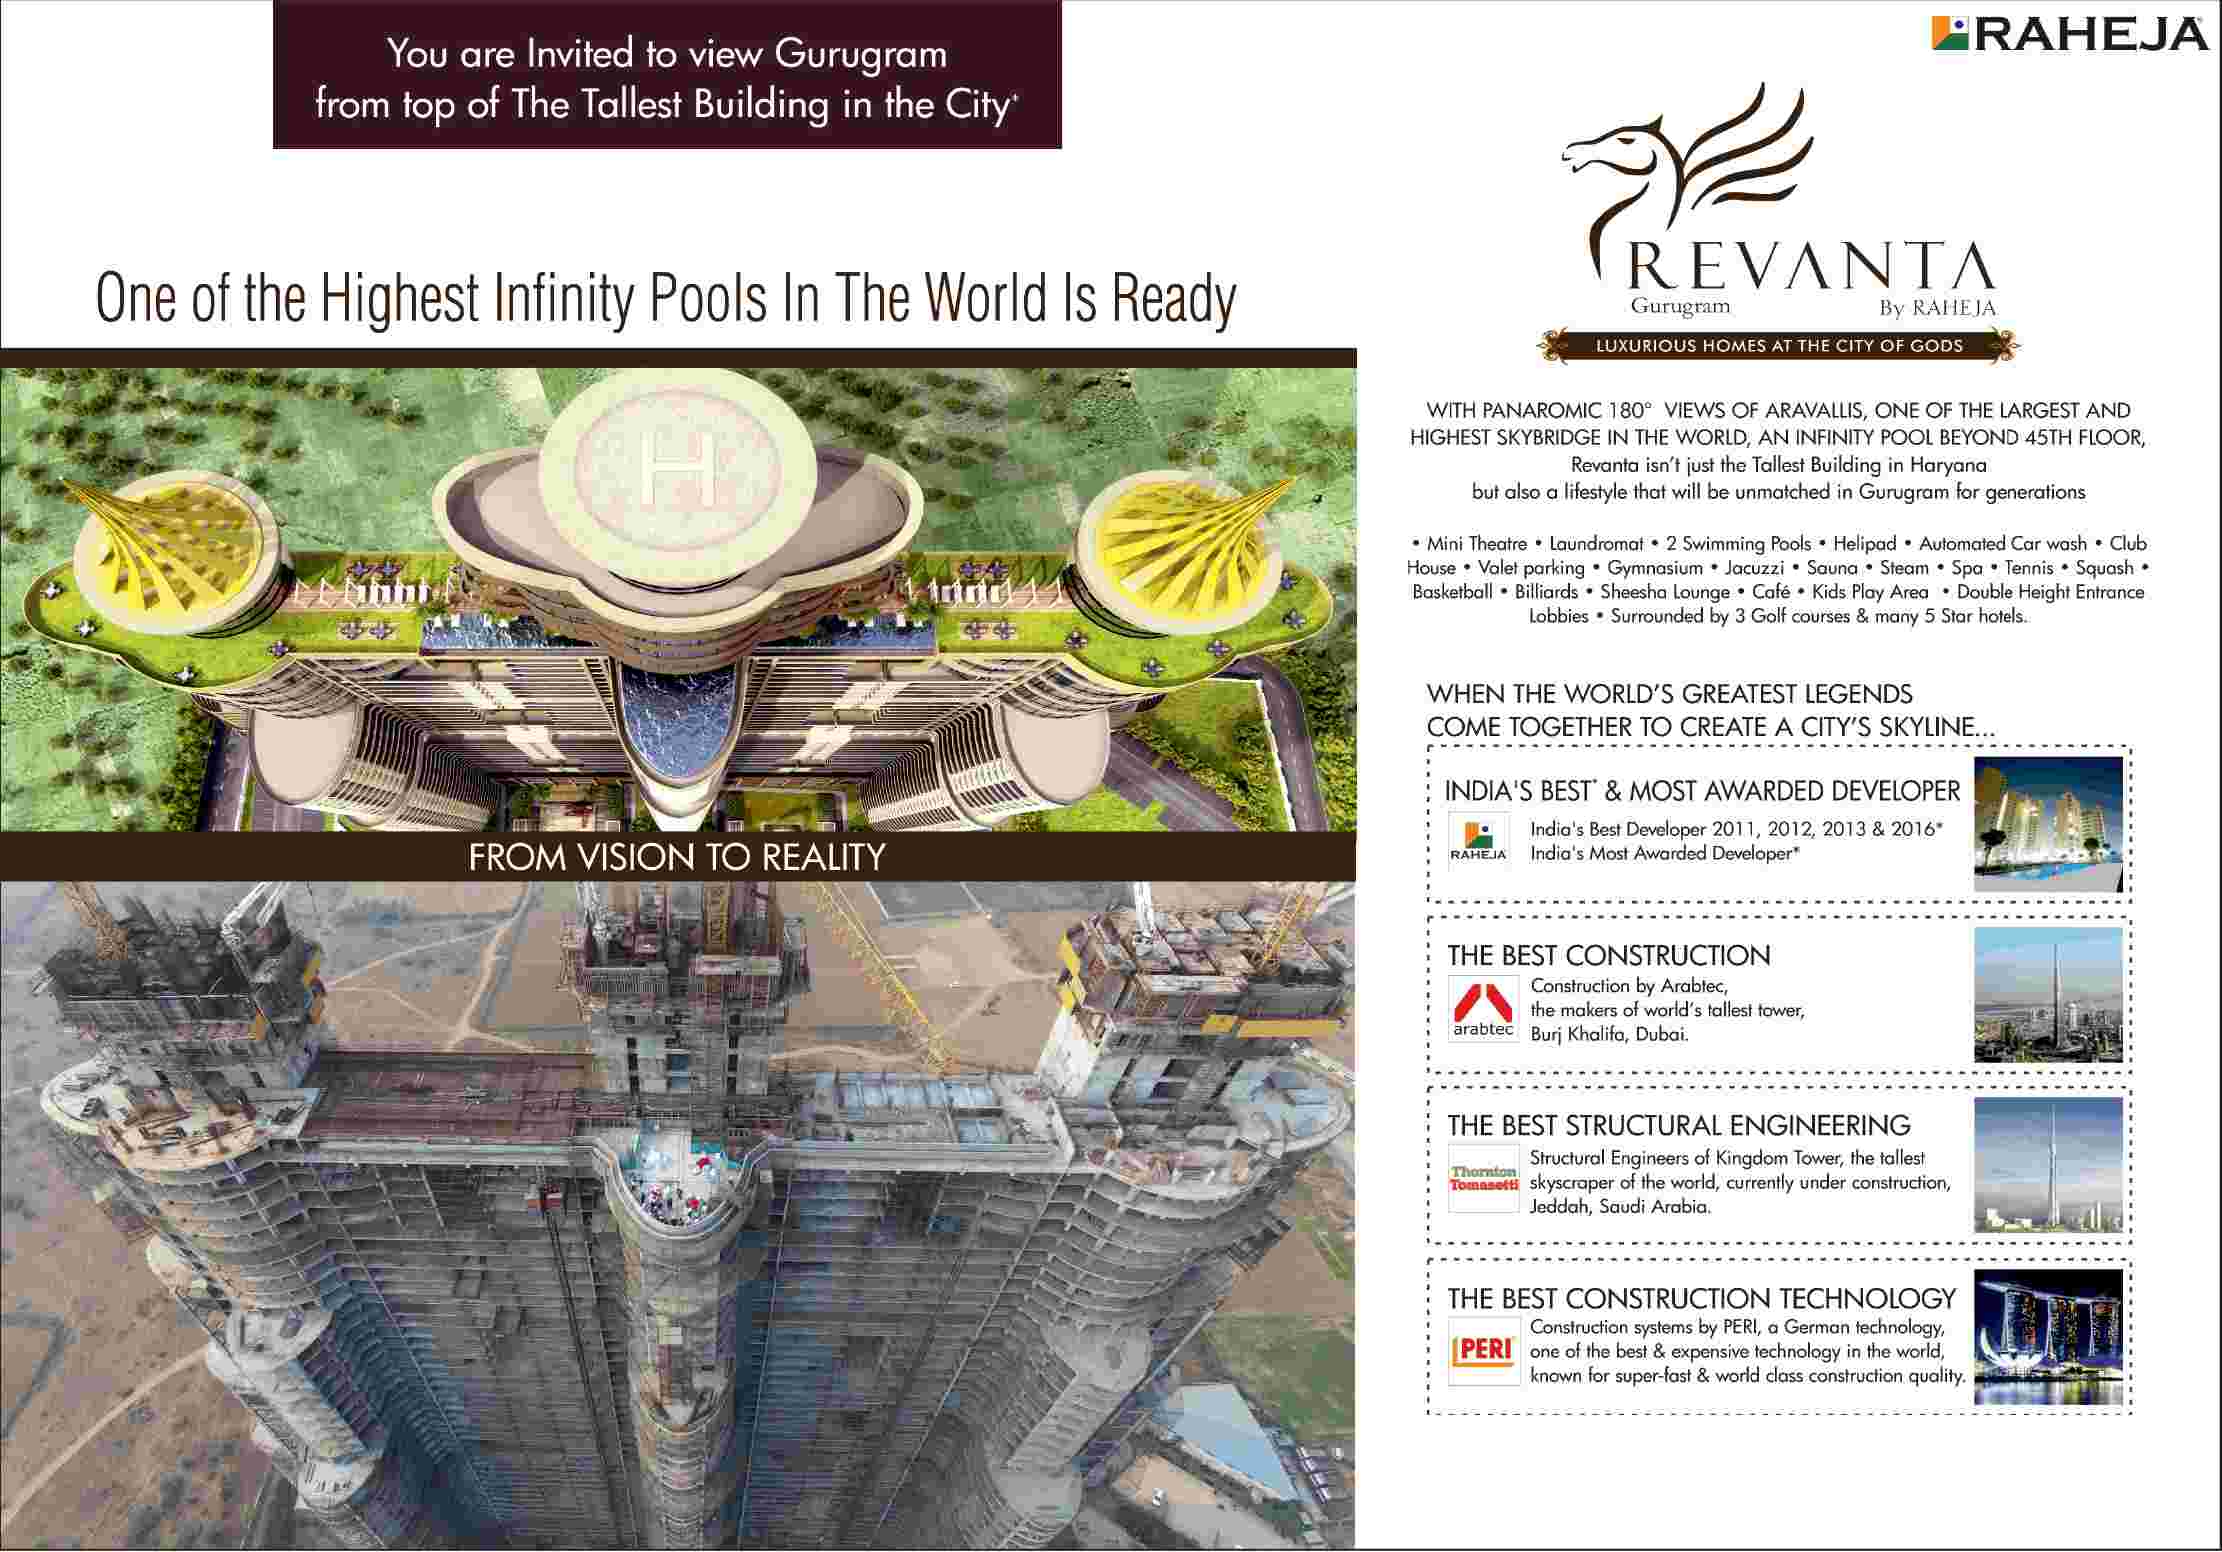 One of the highest infinity pools in the world is ready at Raheja Revanta in Gurgaon Update